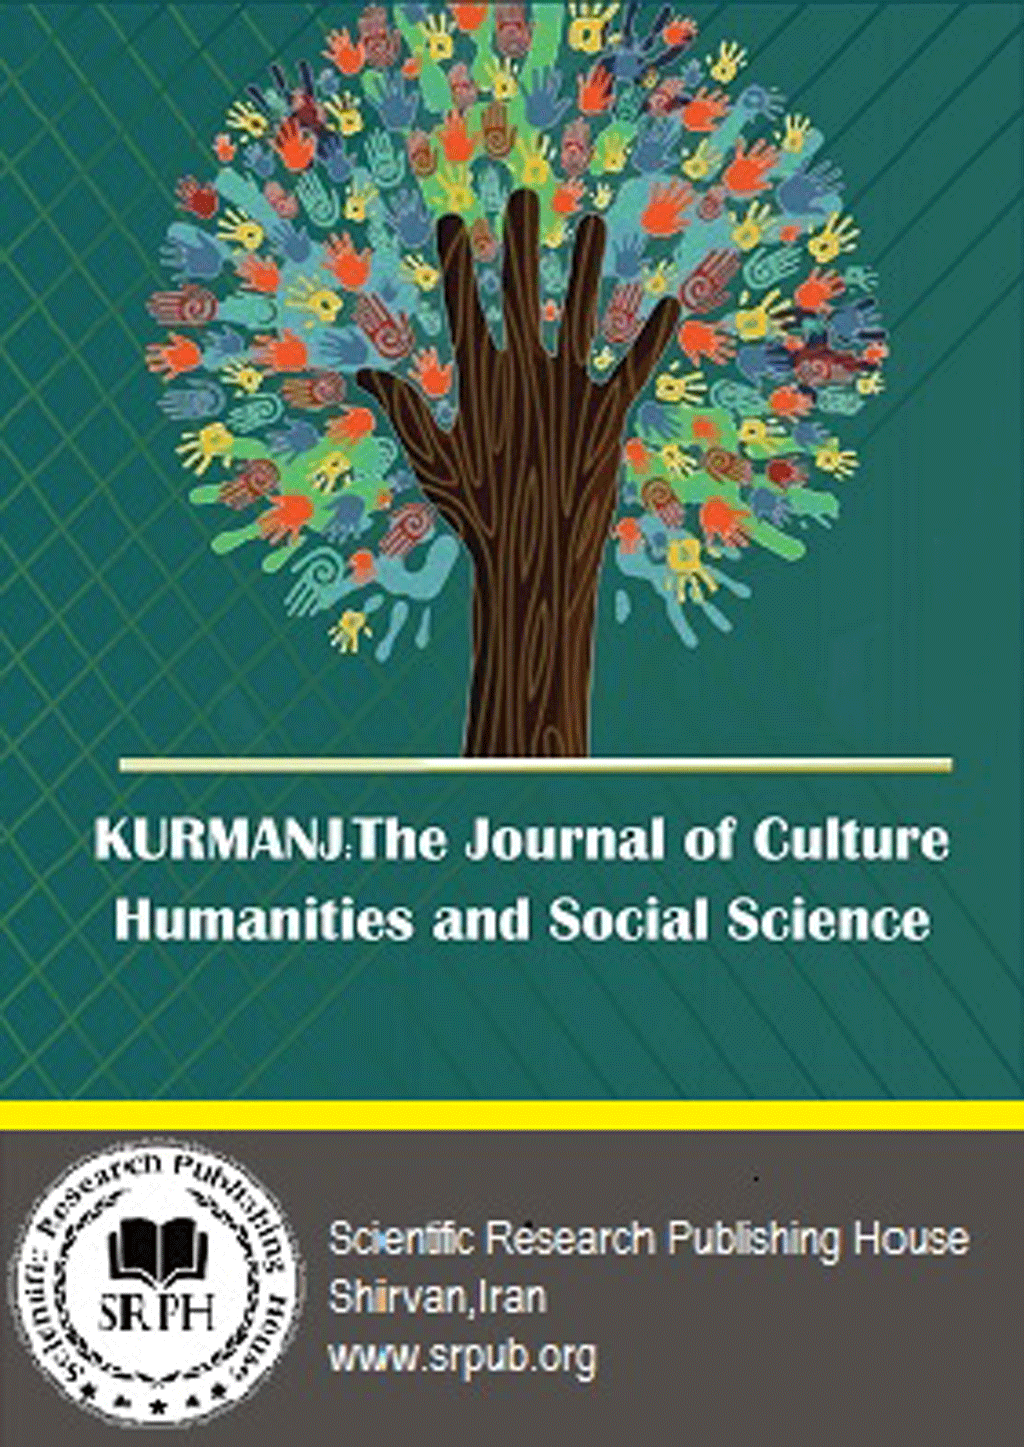 Culture, Humanities and Social Science - Spring 2021, Volume 3 - Number 2